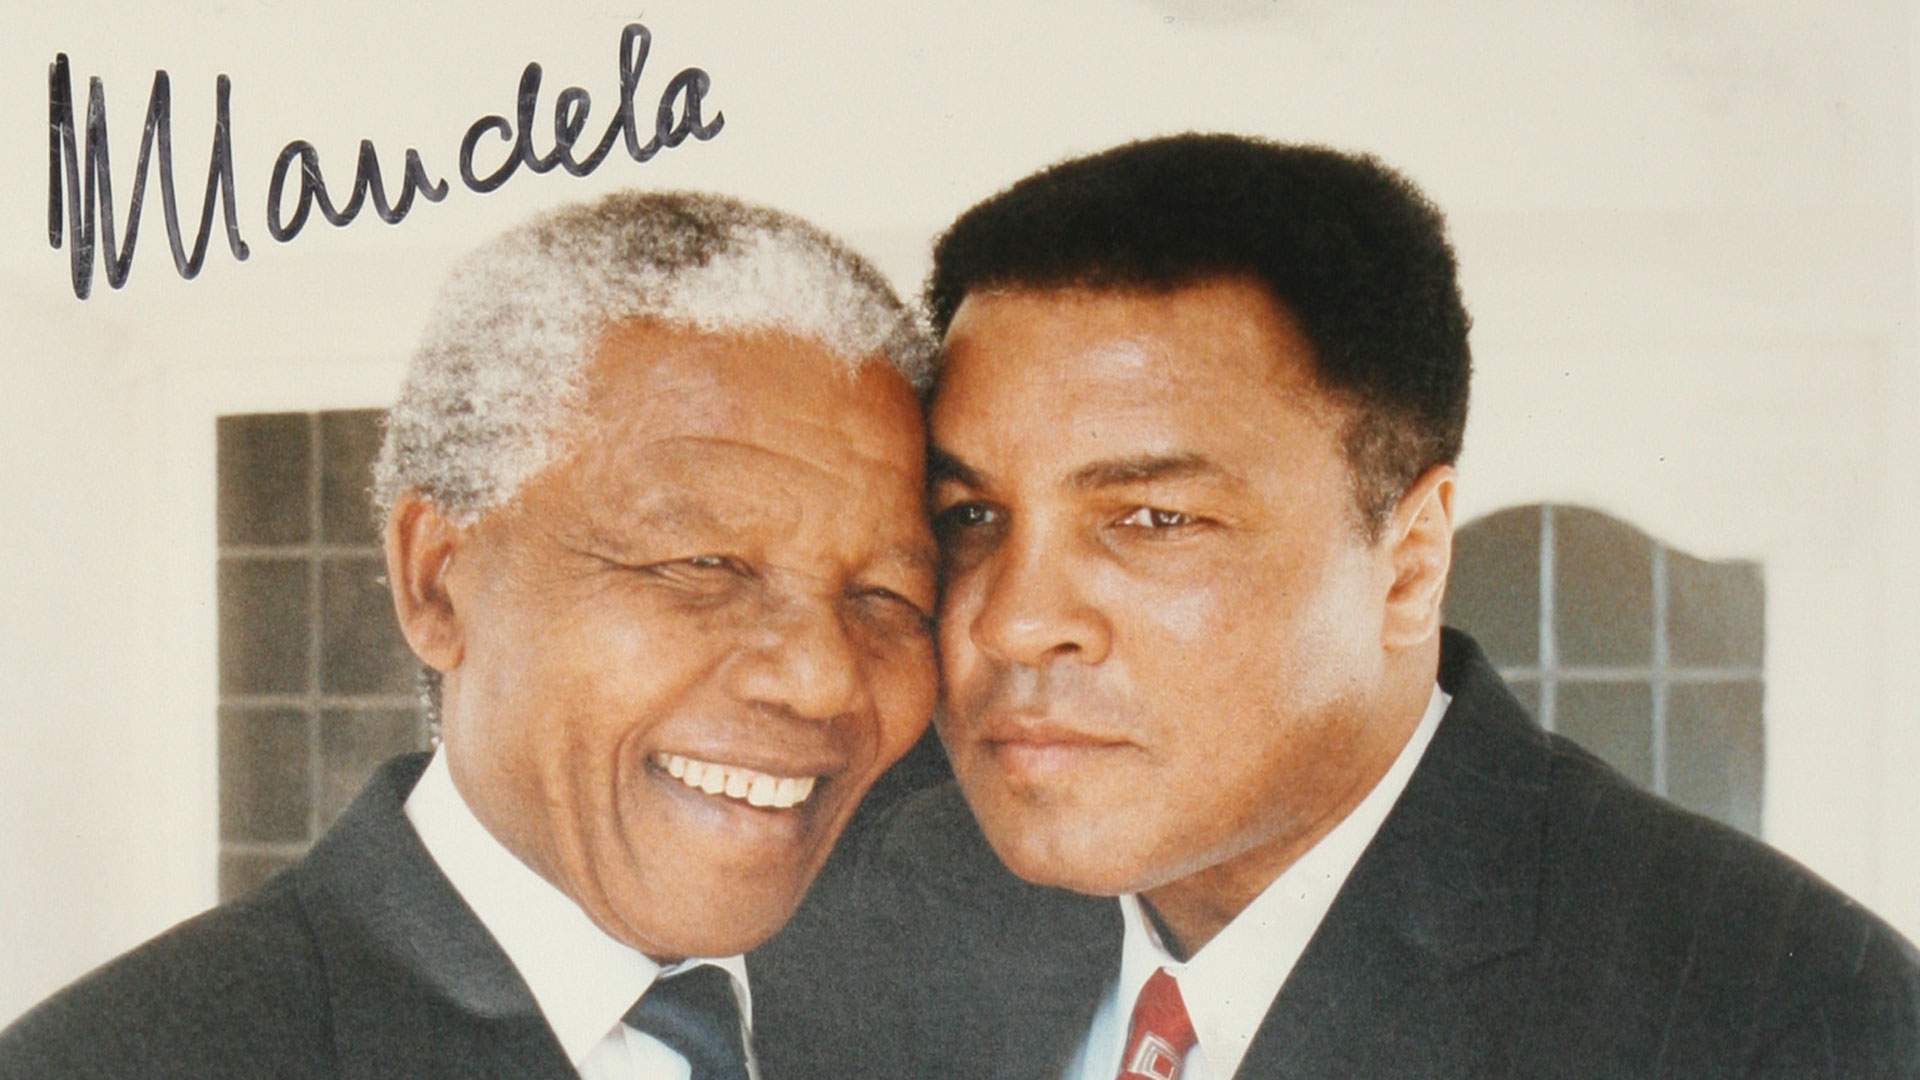 Mandela My Life: The Official Exhibition